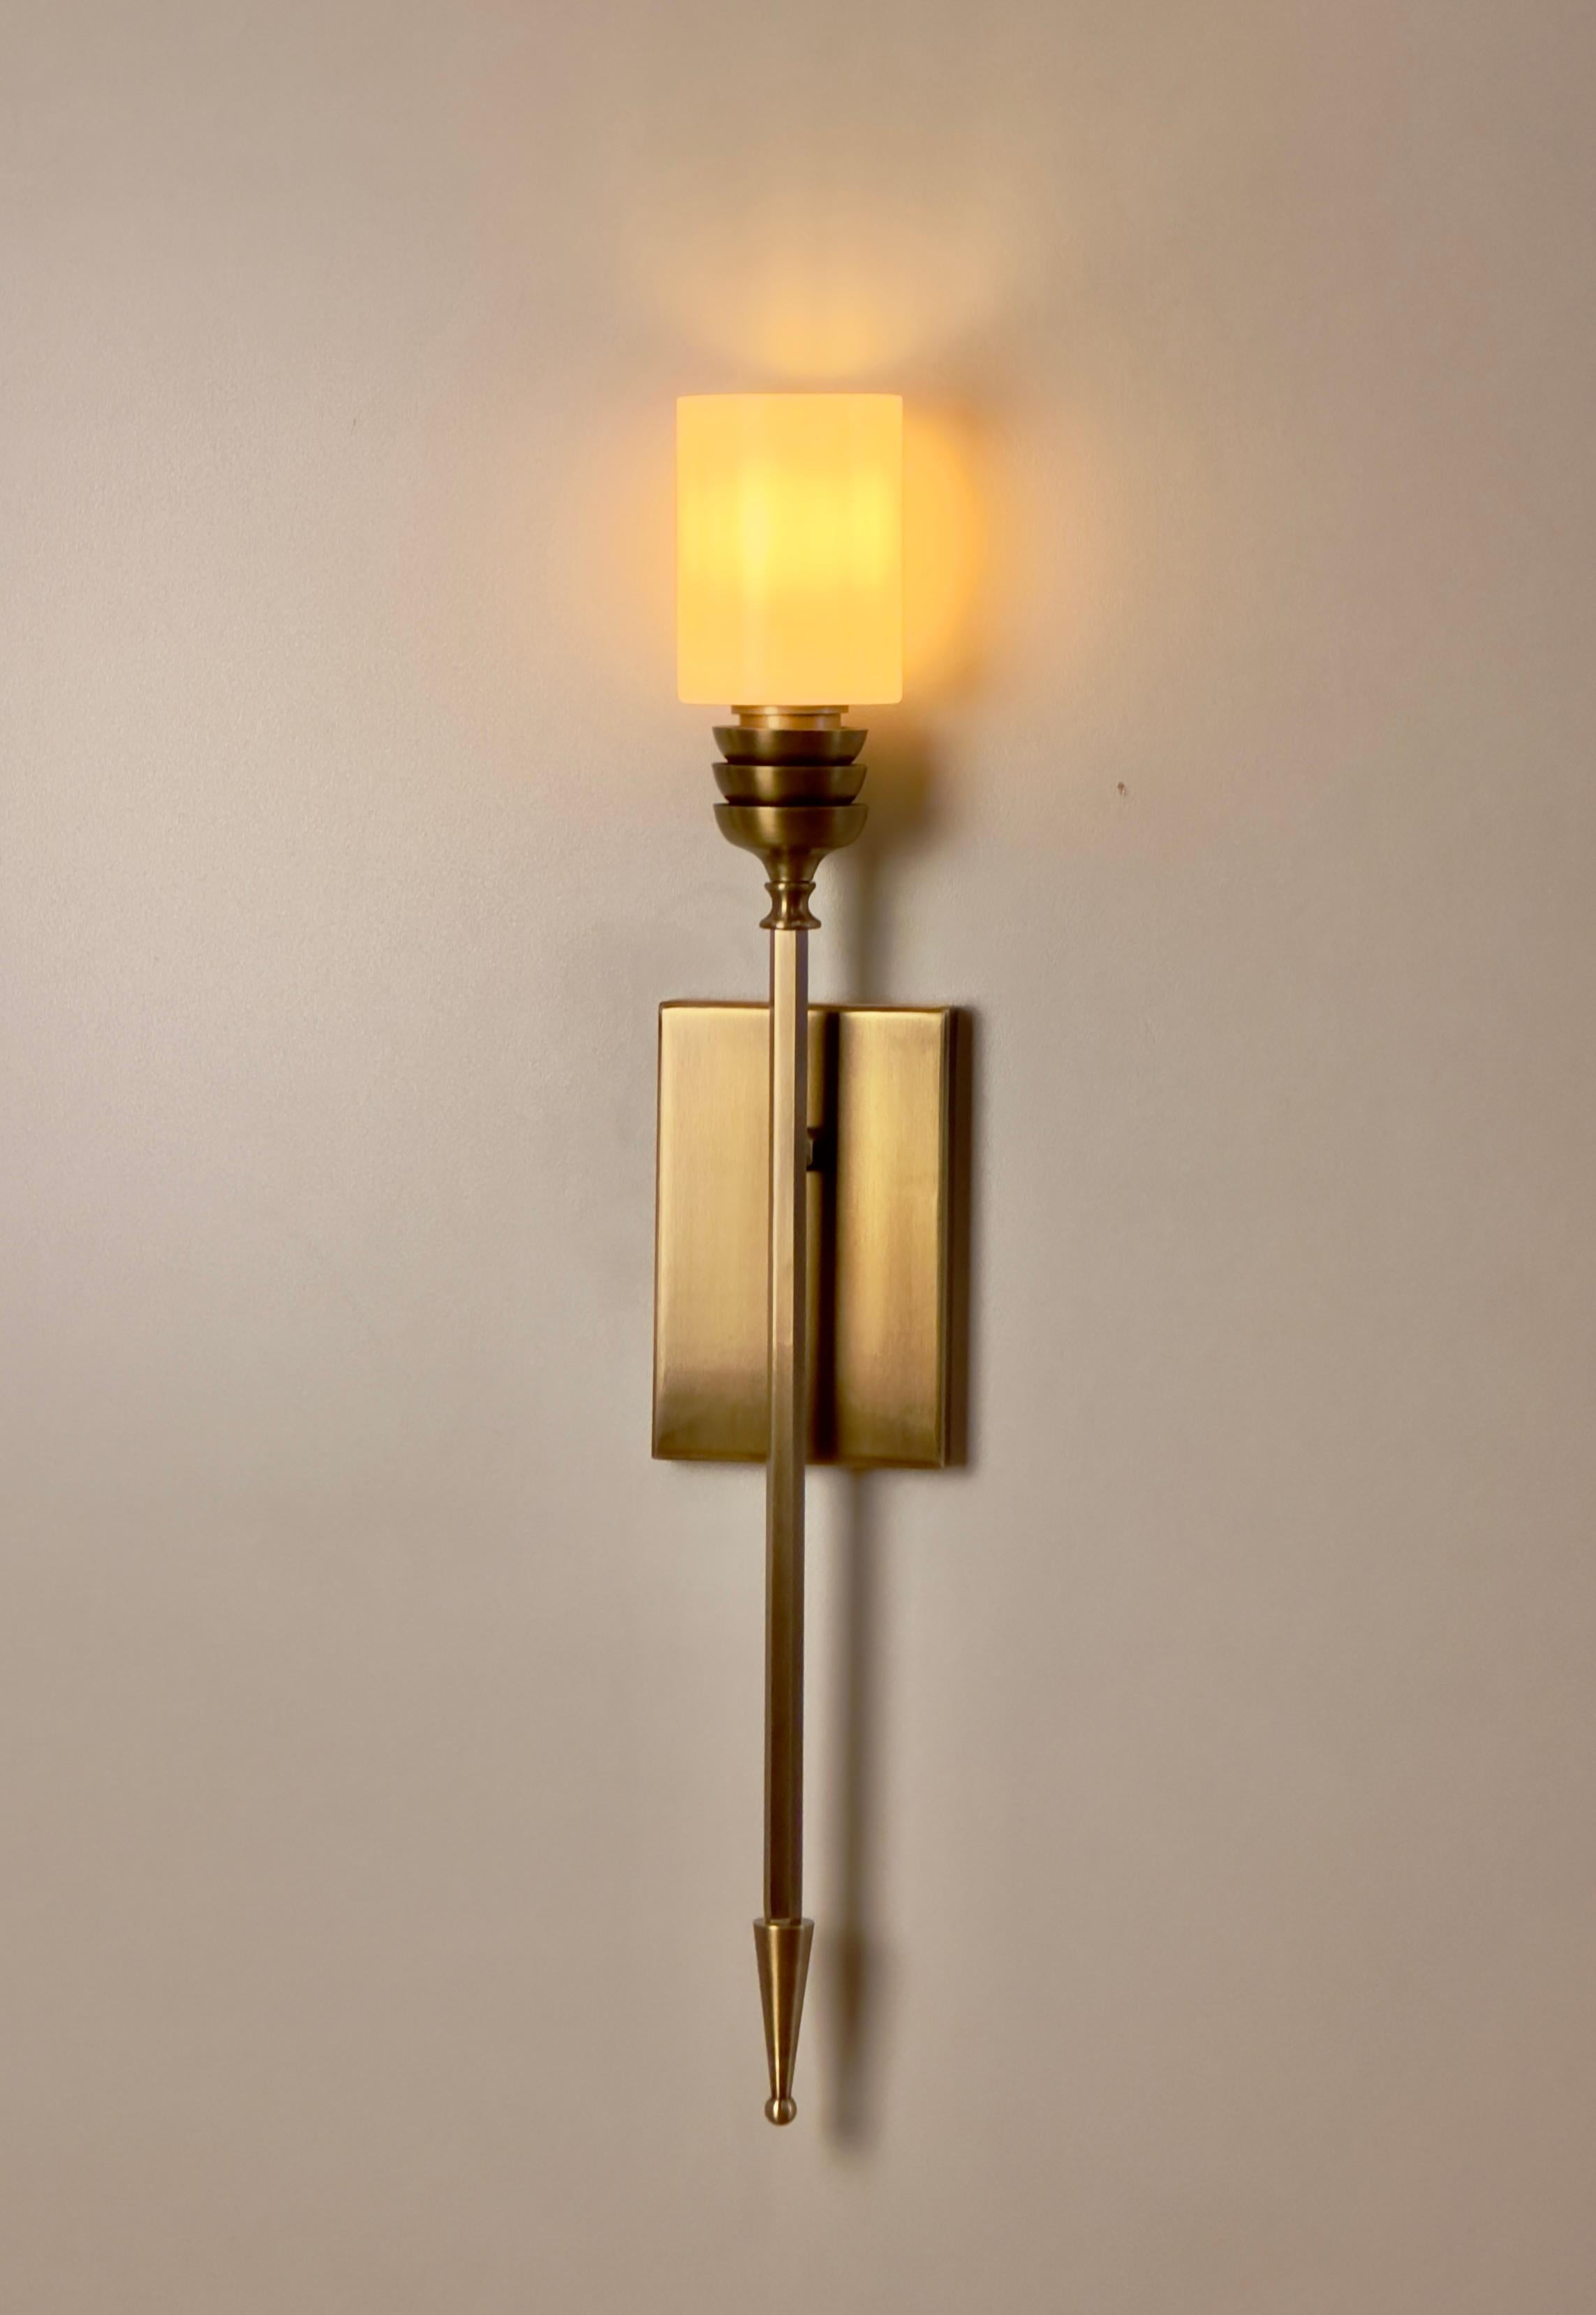 SAGOVIA brass wall lighting is a stunning representation of Mid-Century Modern style, meticulously crafted to add a touch of elegance and sophistication to any space. This exceptional wall sconce is expertly designed, featuring a cylindrical glass